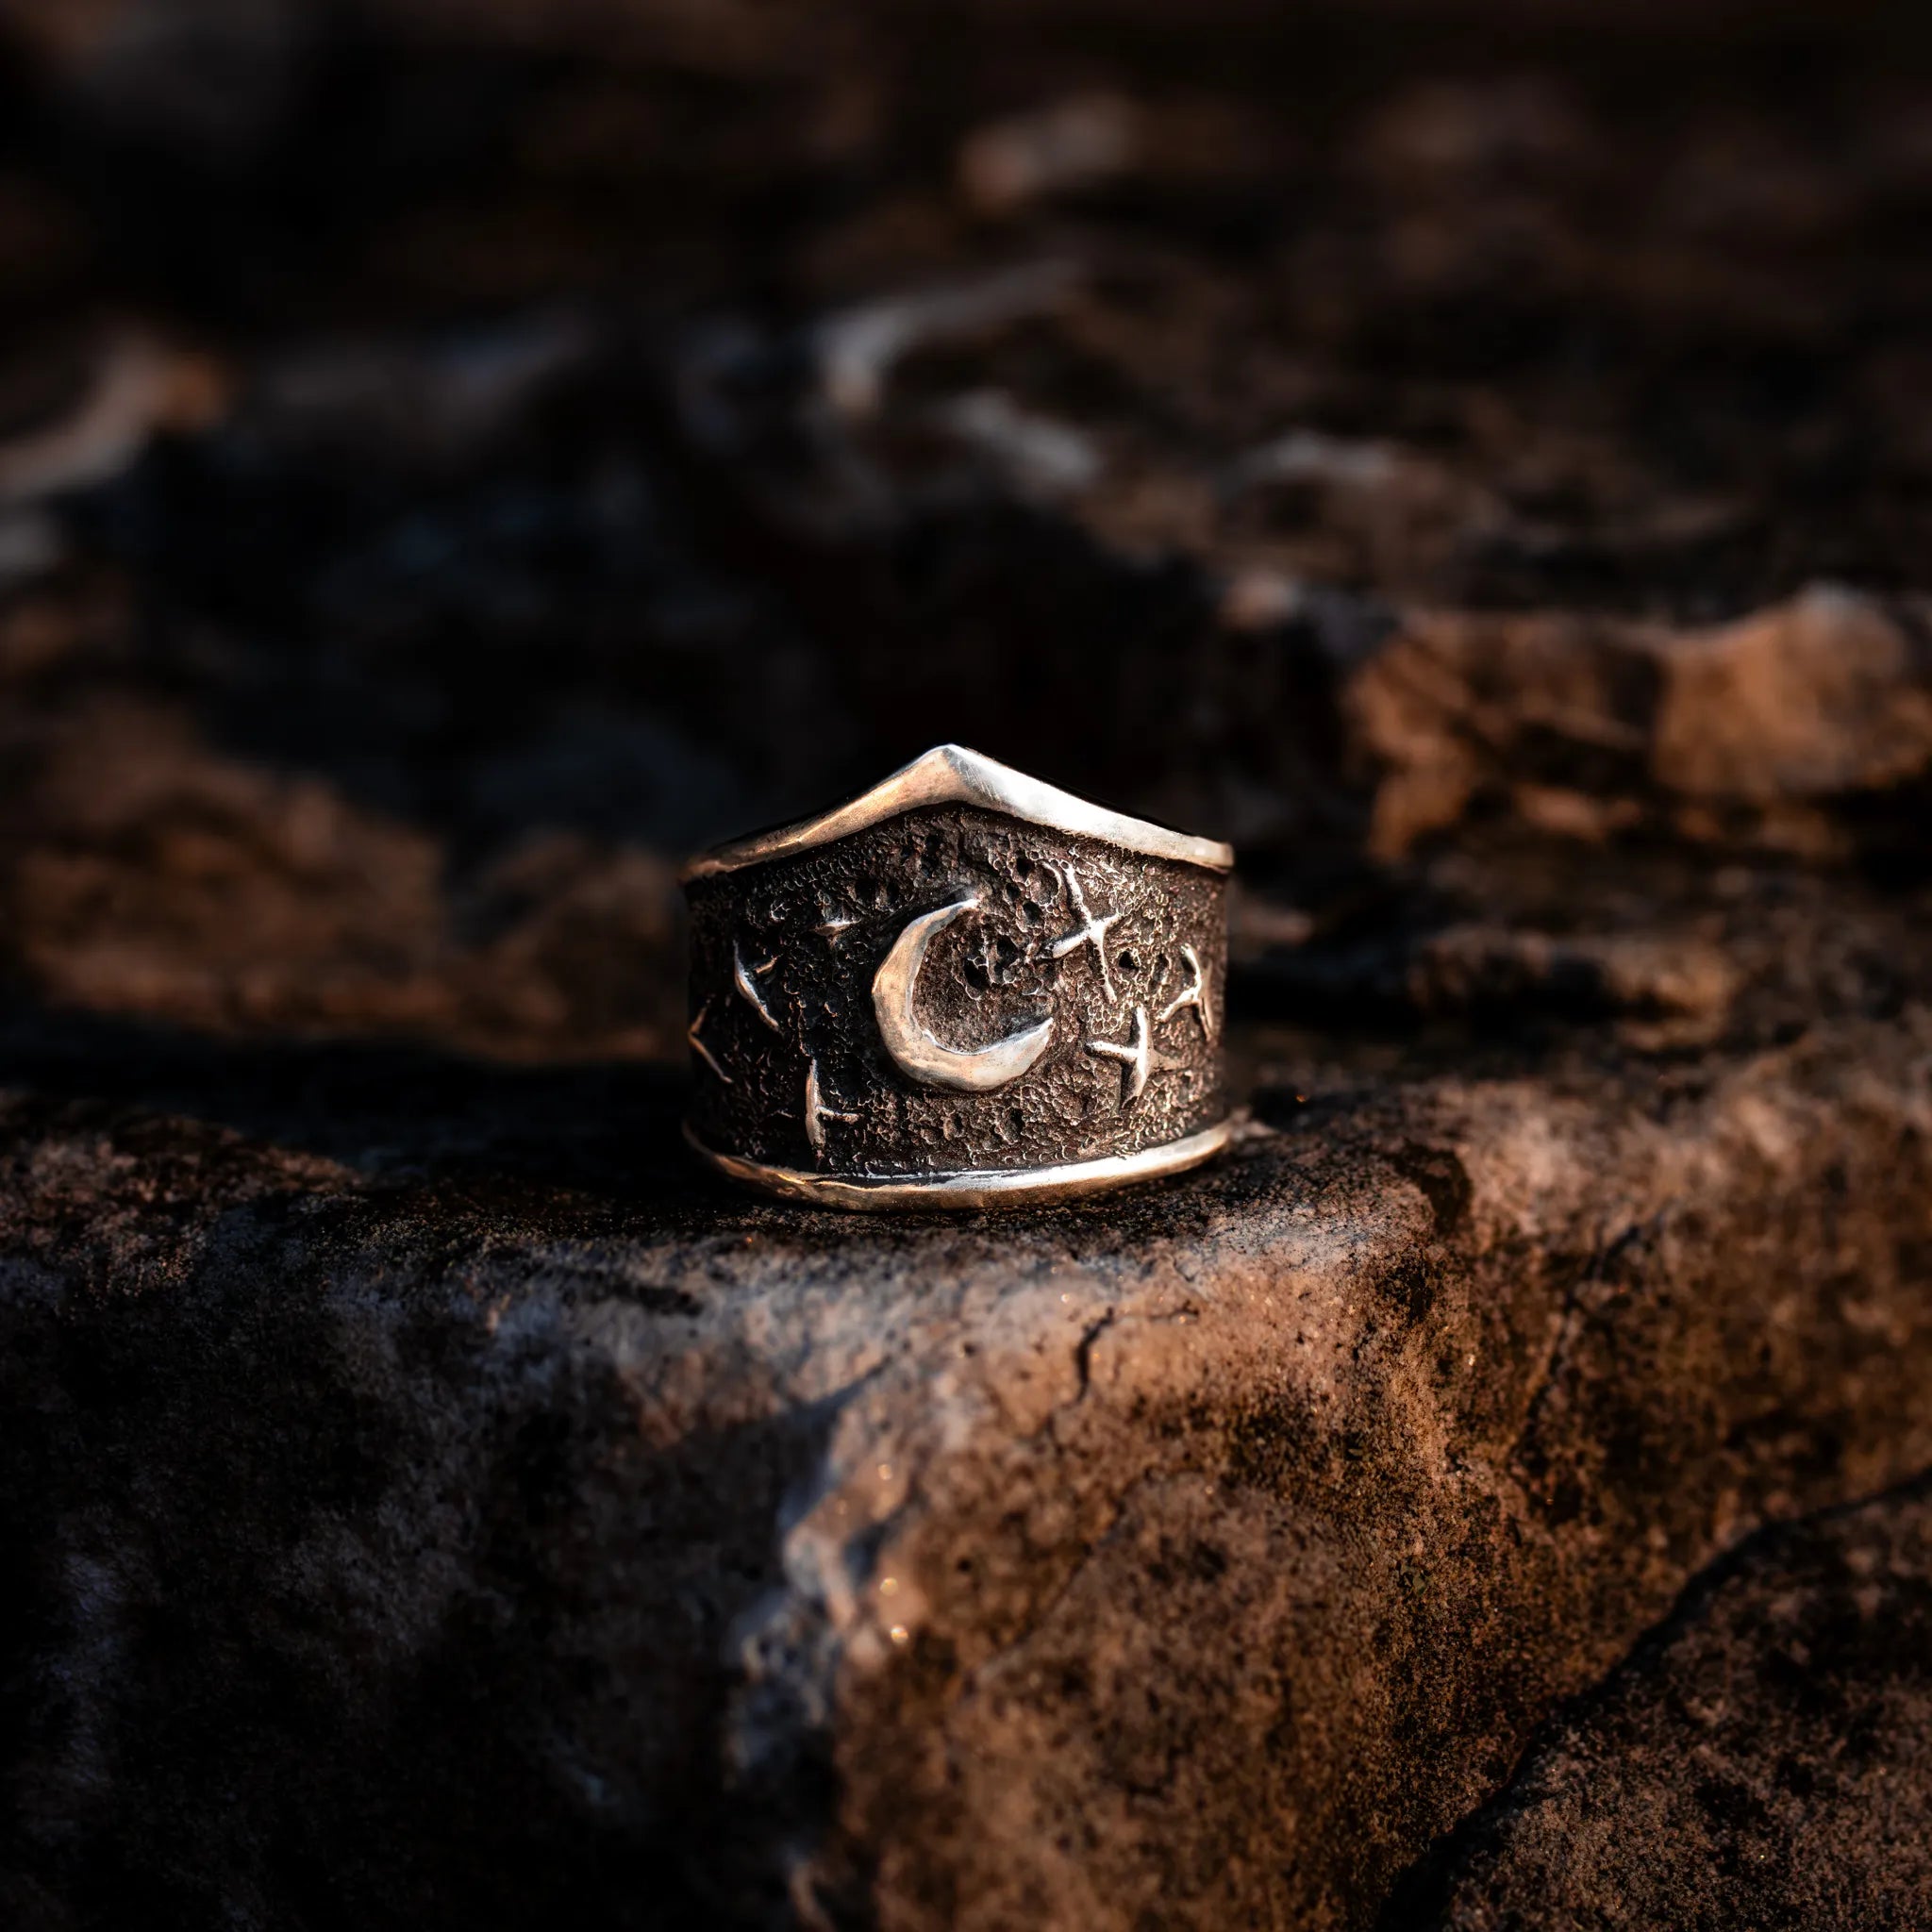 celestial ring with a crescent moon in the center and stars surrounding it. This ring is a wide,statement ring made from sterling silver and has an arched shape